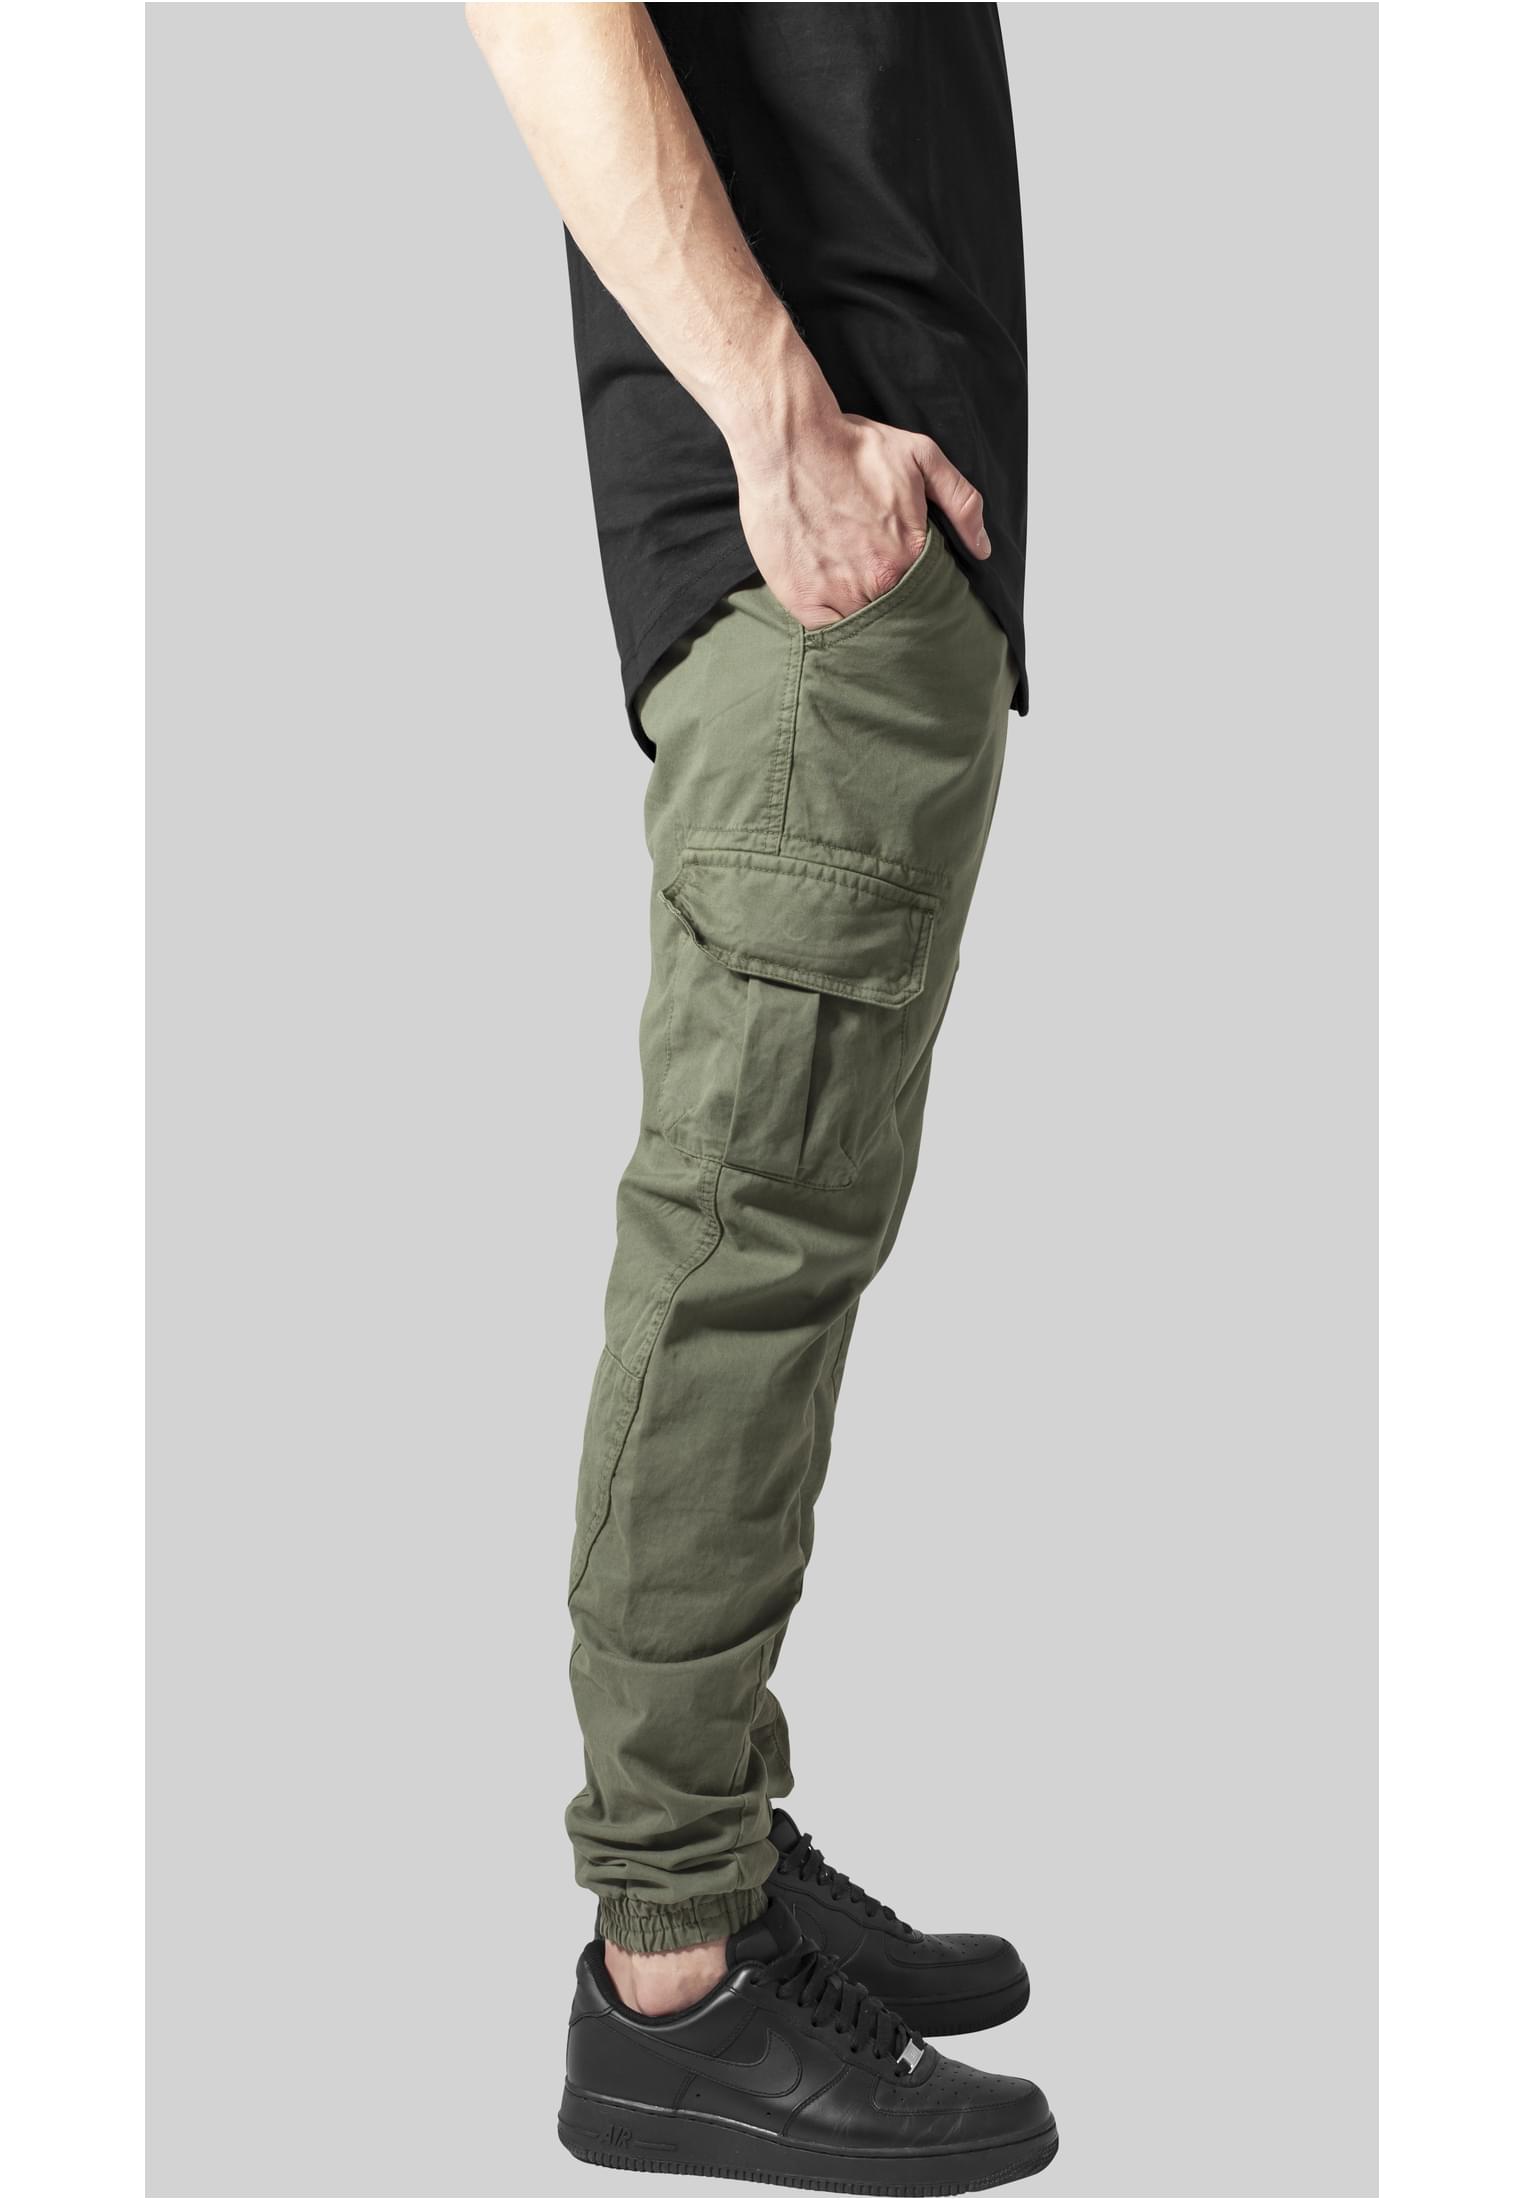 Sweatpants Cargo Jogging Pants in Farbe olive